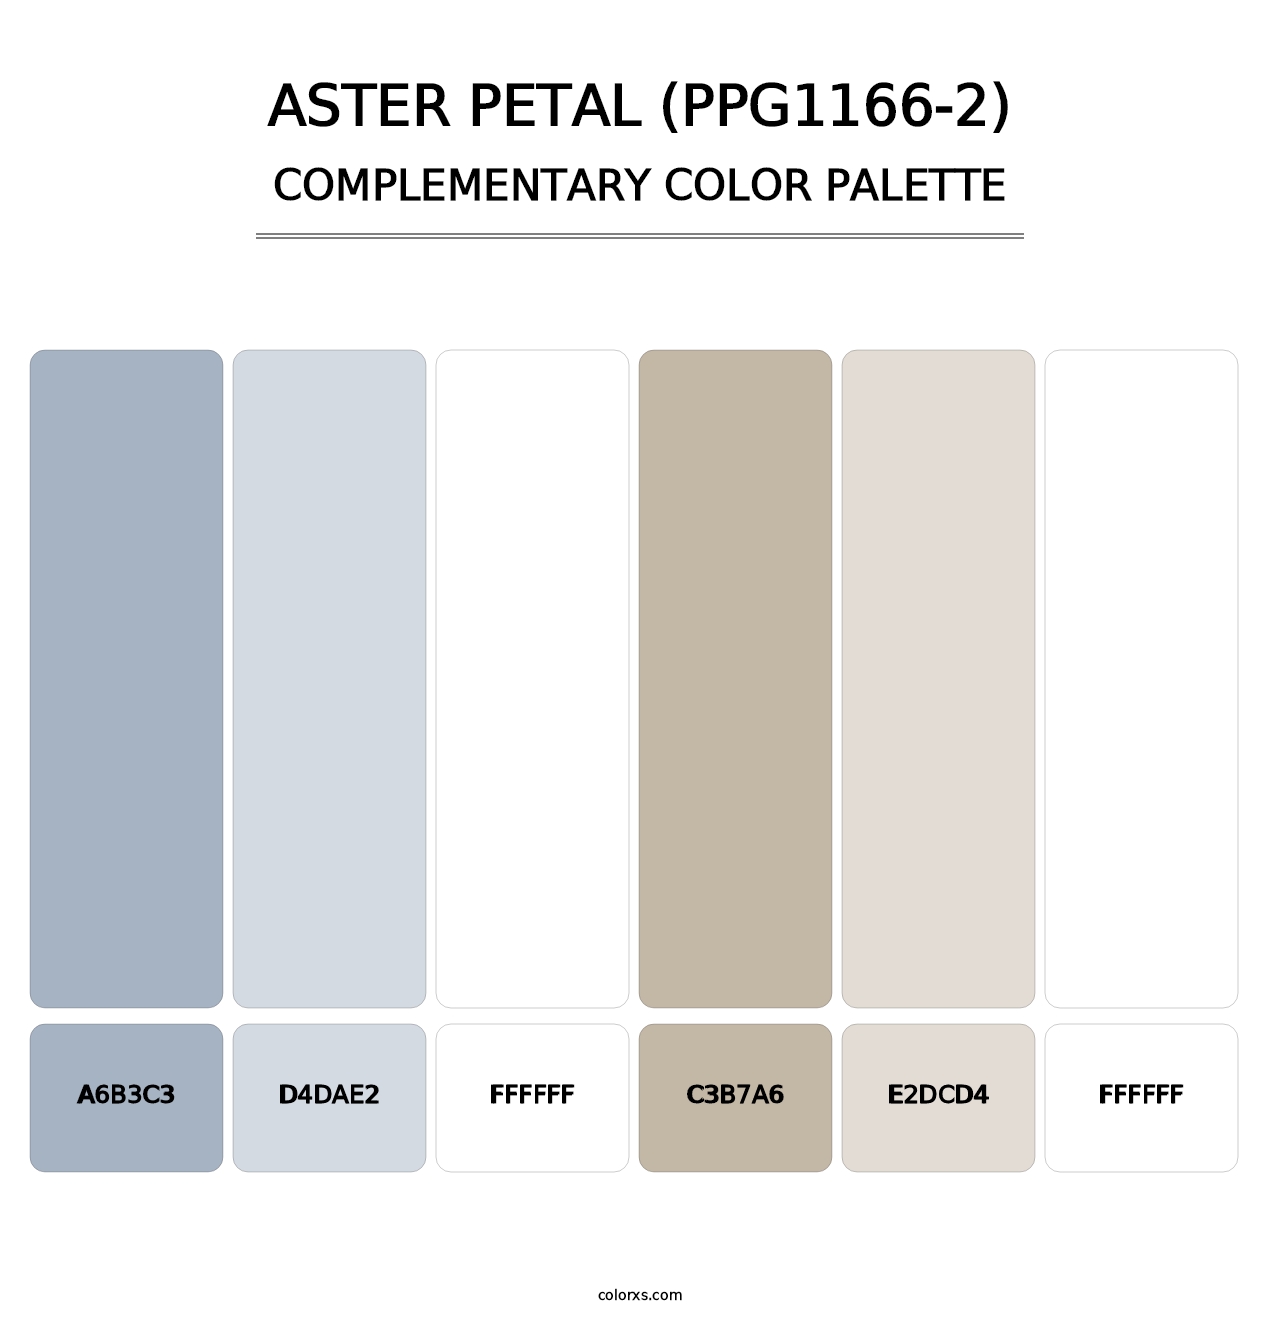 Aster Petal (PPG1166-2) - Complementary Color Palette